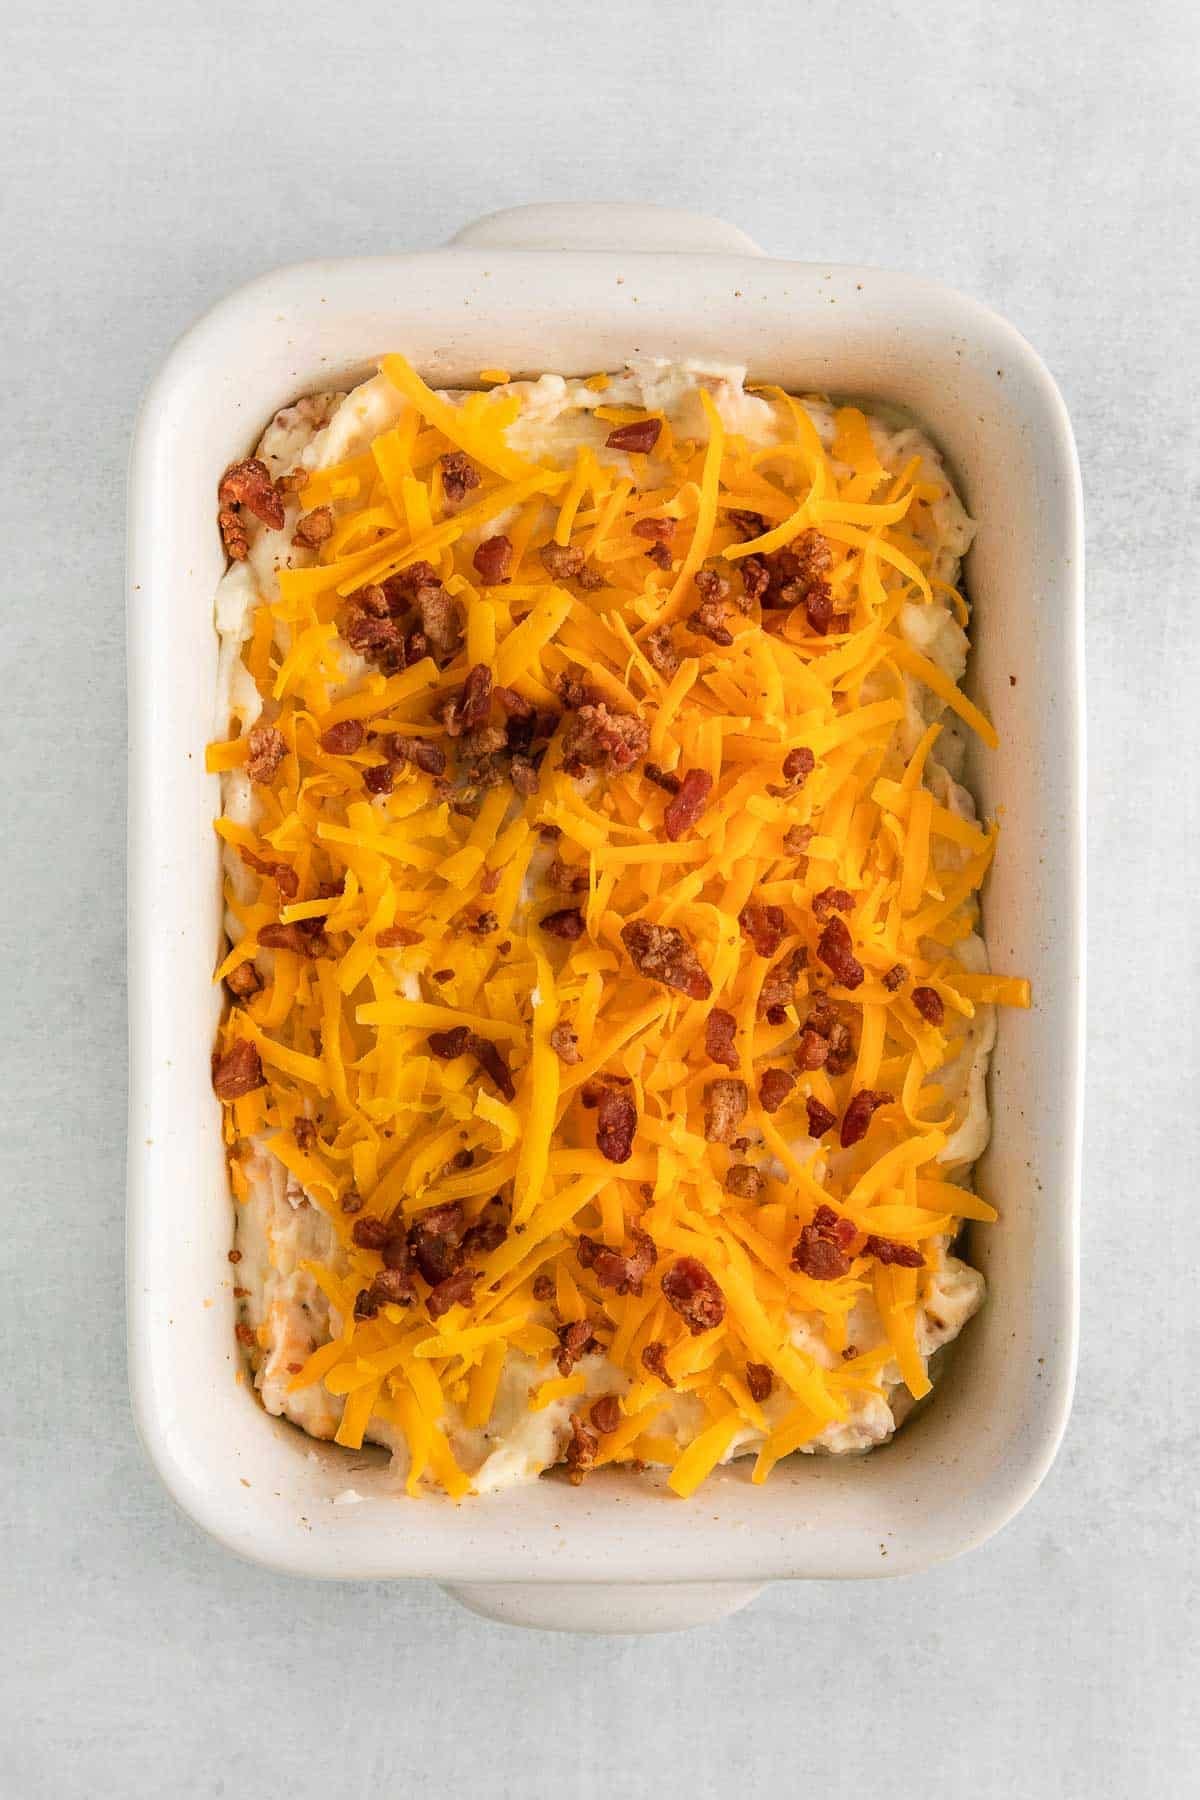 white rectangle baking with mashed potatoes topped with shredded cheese and bacon crumbles.